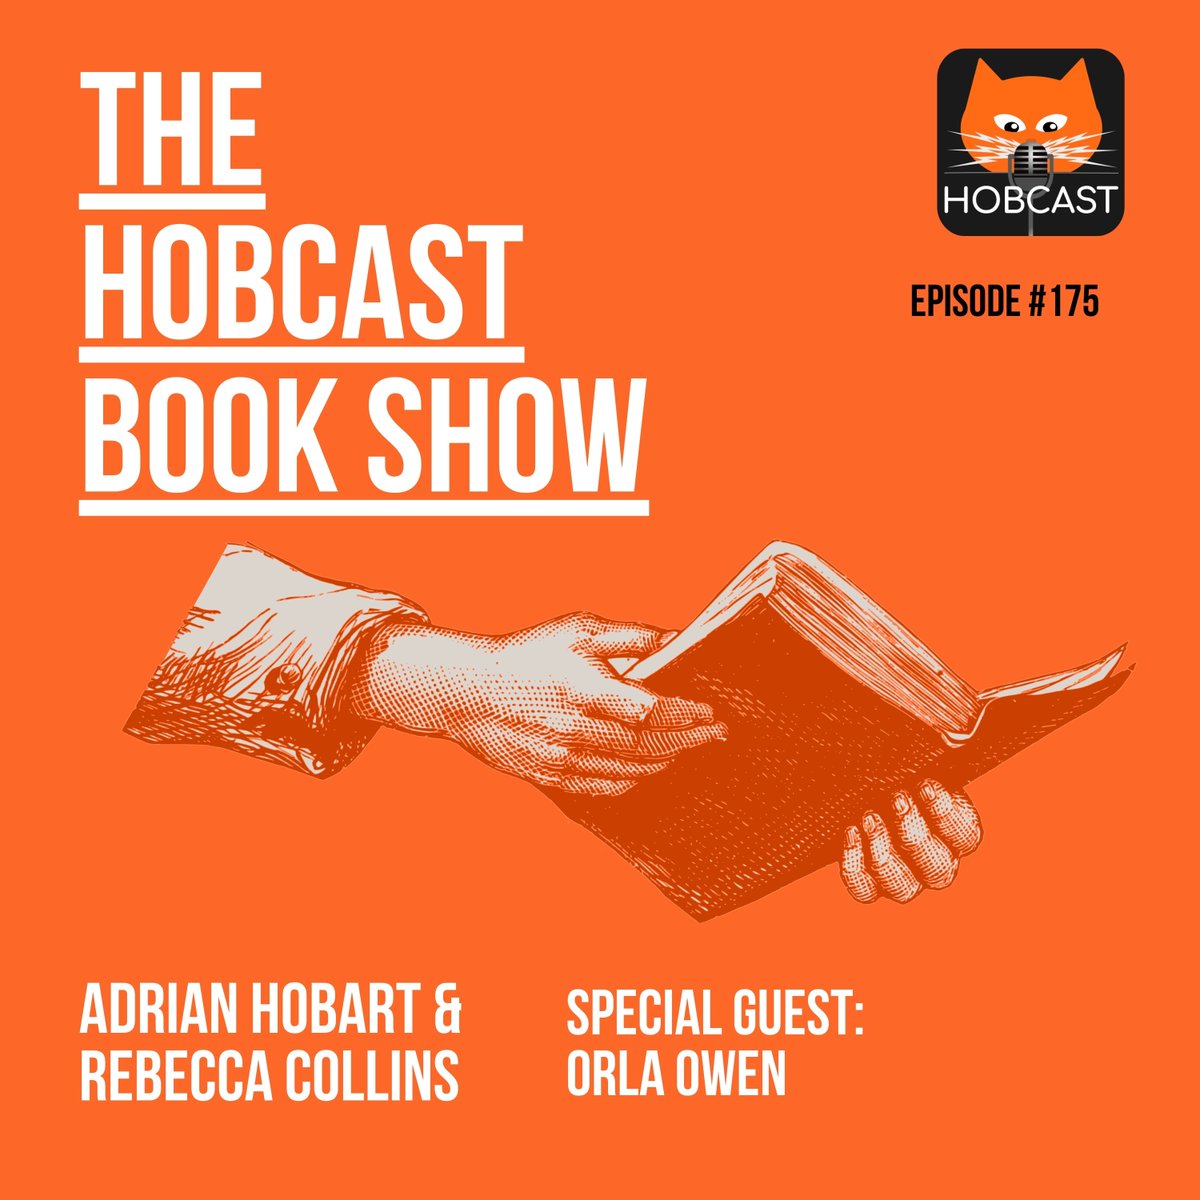 This week's podcast interview is with Orla Owen author of the wonderful CHRIST ON A BIKE which I read a few months ago and LOVED! We had a great chat with Orla about all sorts of things, including aubergines: shows.acast.com/the-hobcast-bo… @orlaowenwriting @Ofmooseandmen #podast